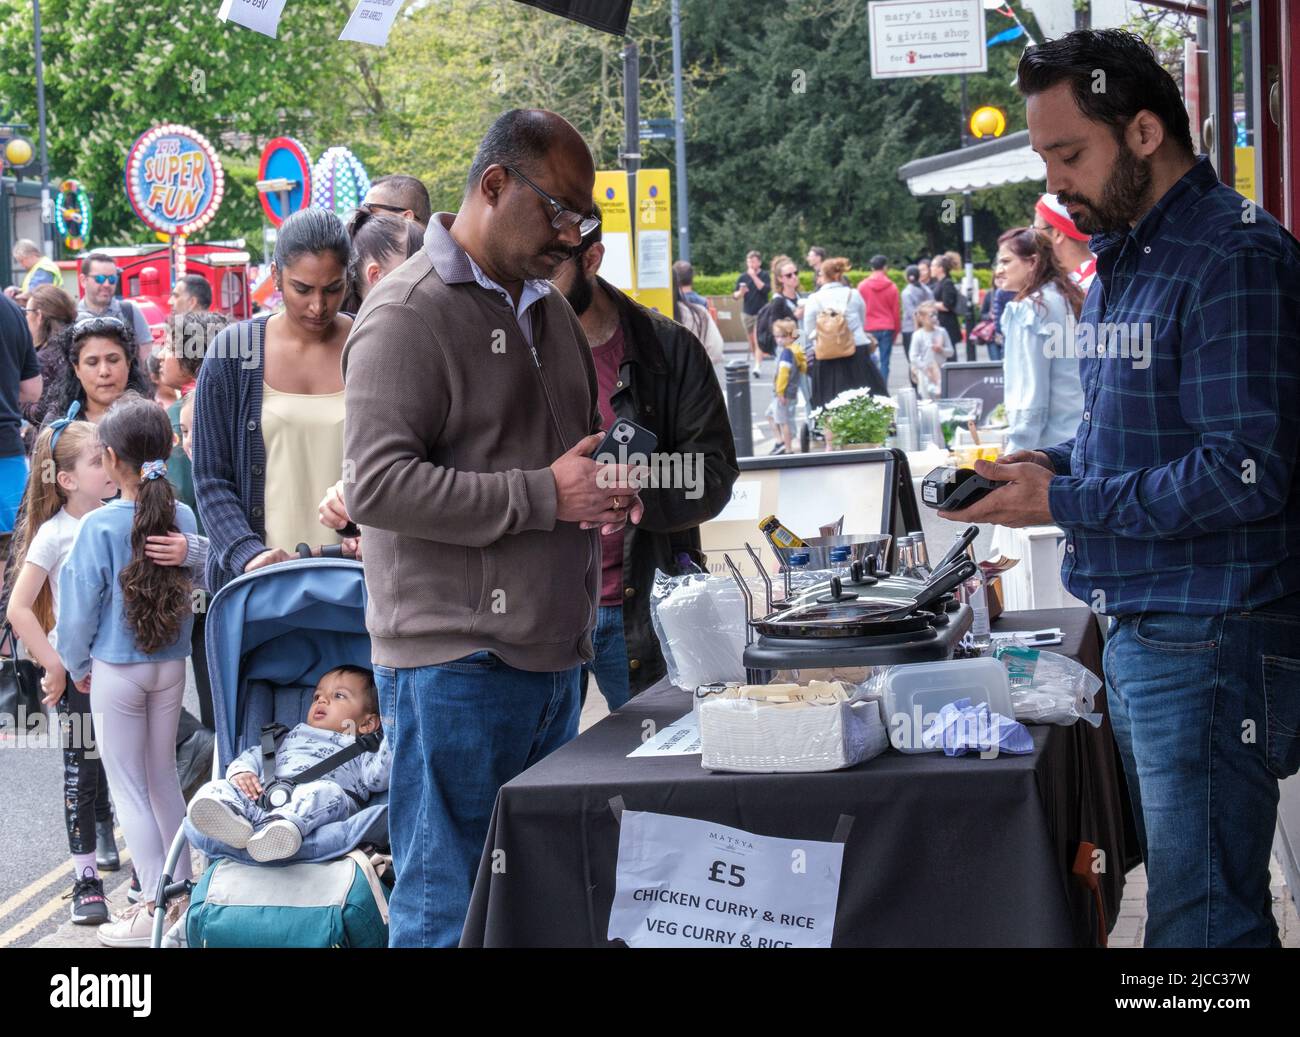 A man buys chicken curry & rice from a stall outside Matsya Indian cuisine restaurant at St George’s Day Celebration 2022, Pinner, Harrow, London. Stock Photo